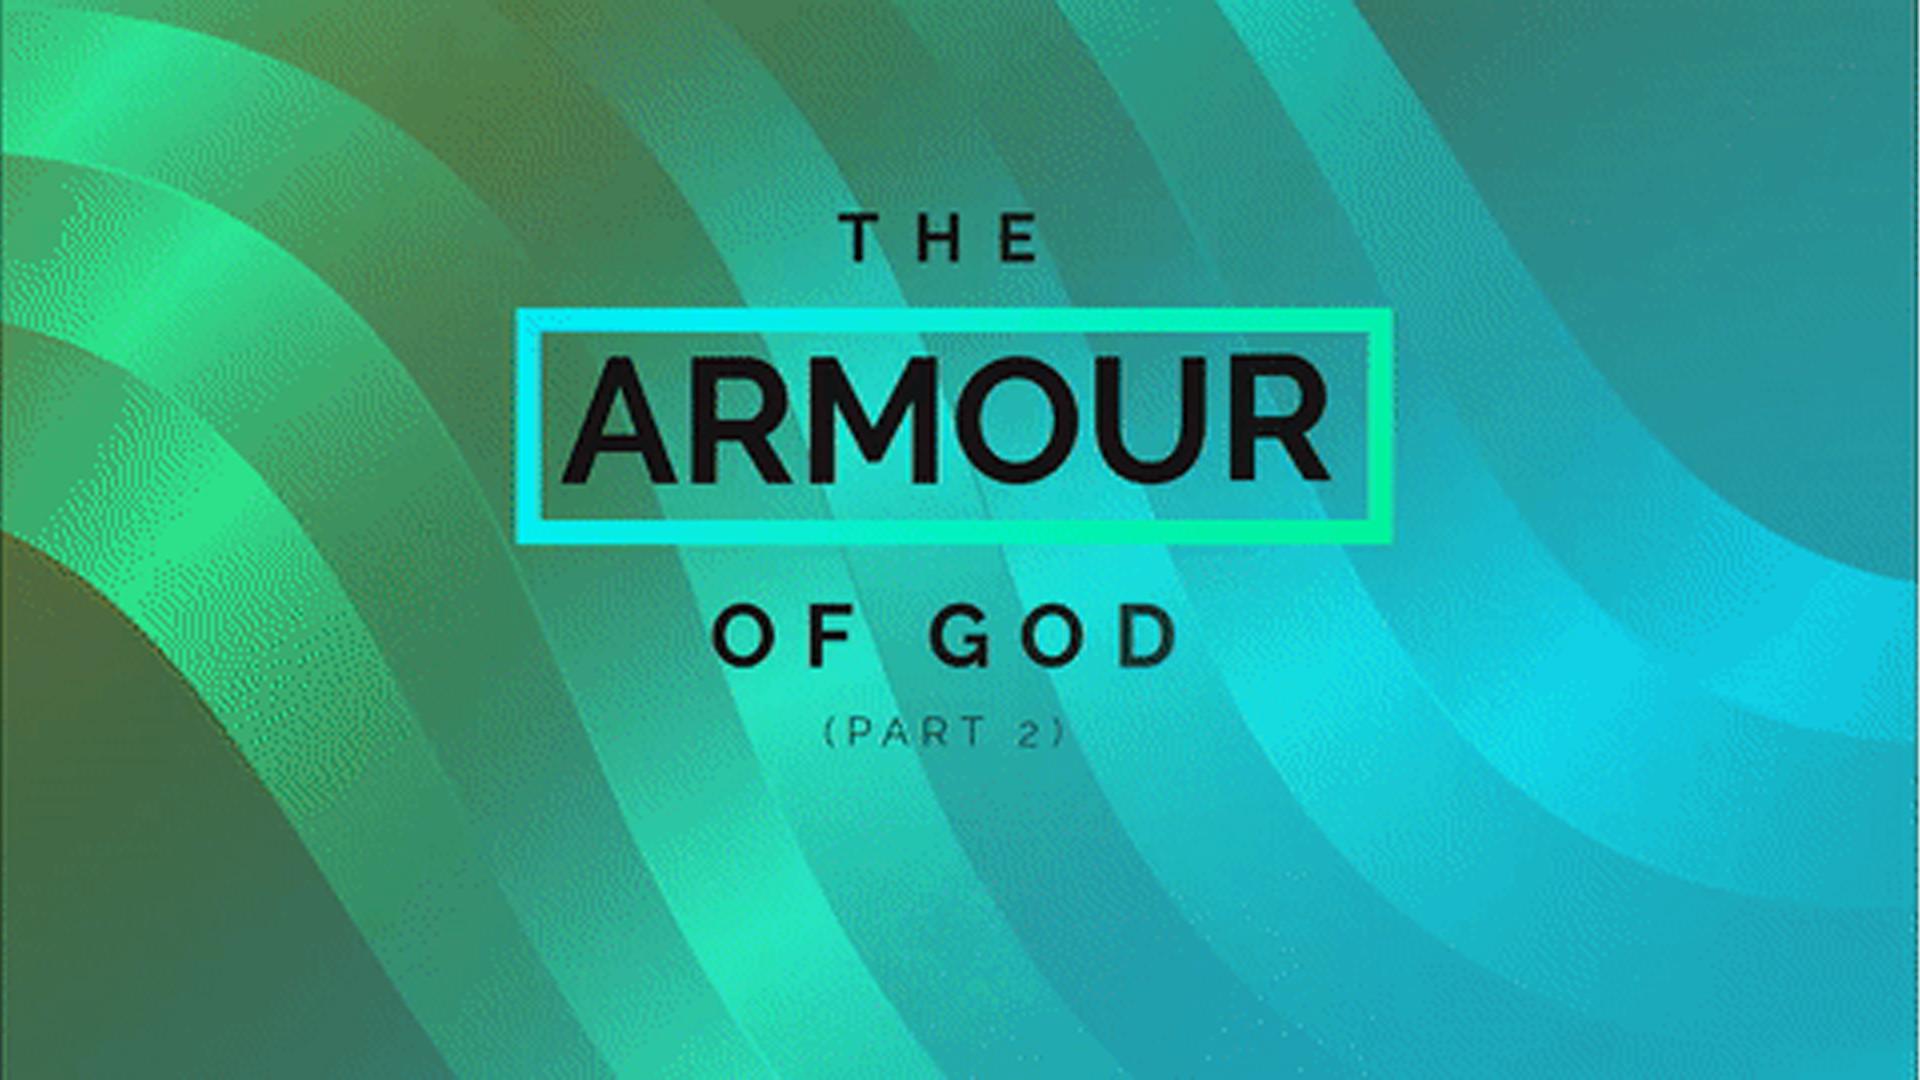 Featured image for “The Armour of God (Part 2)”